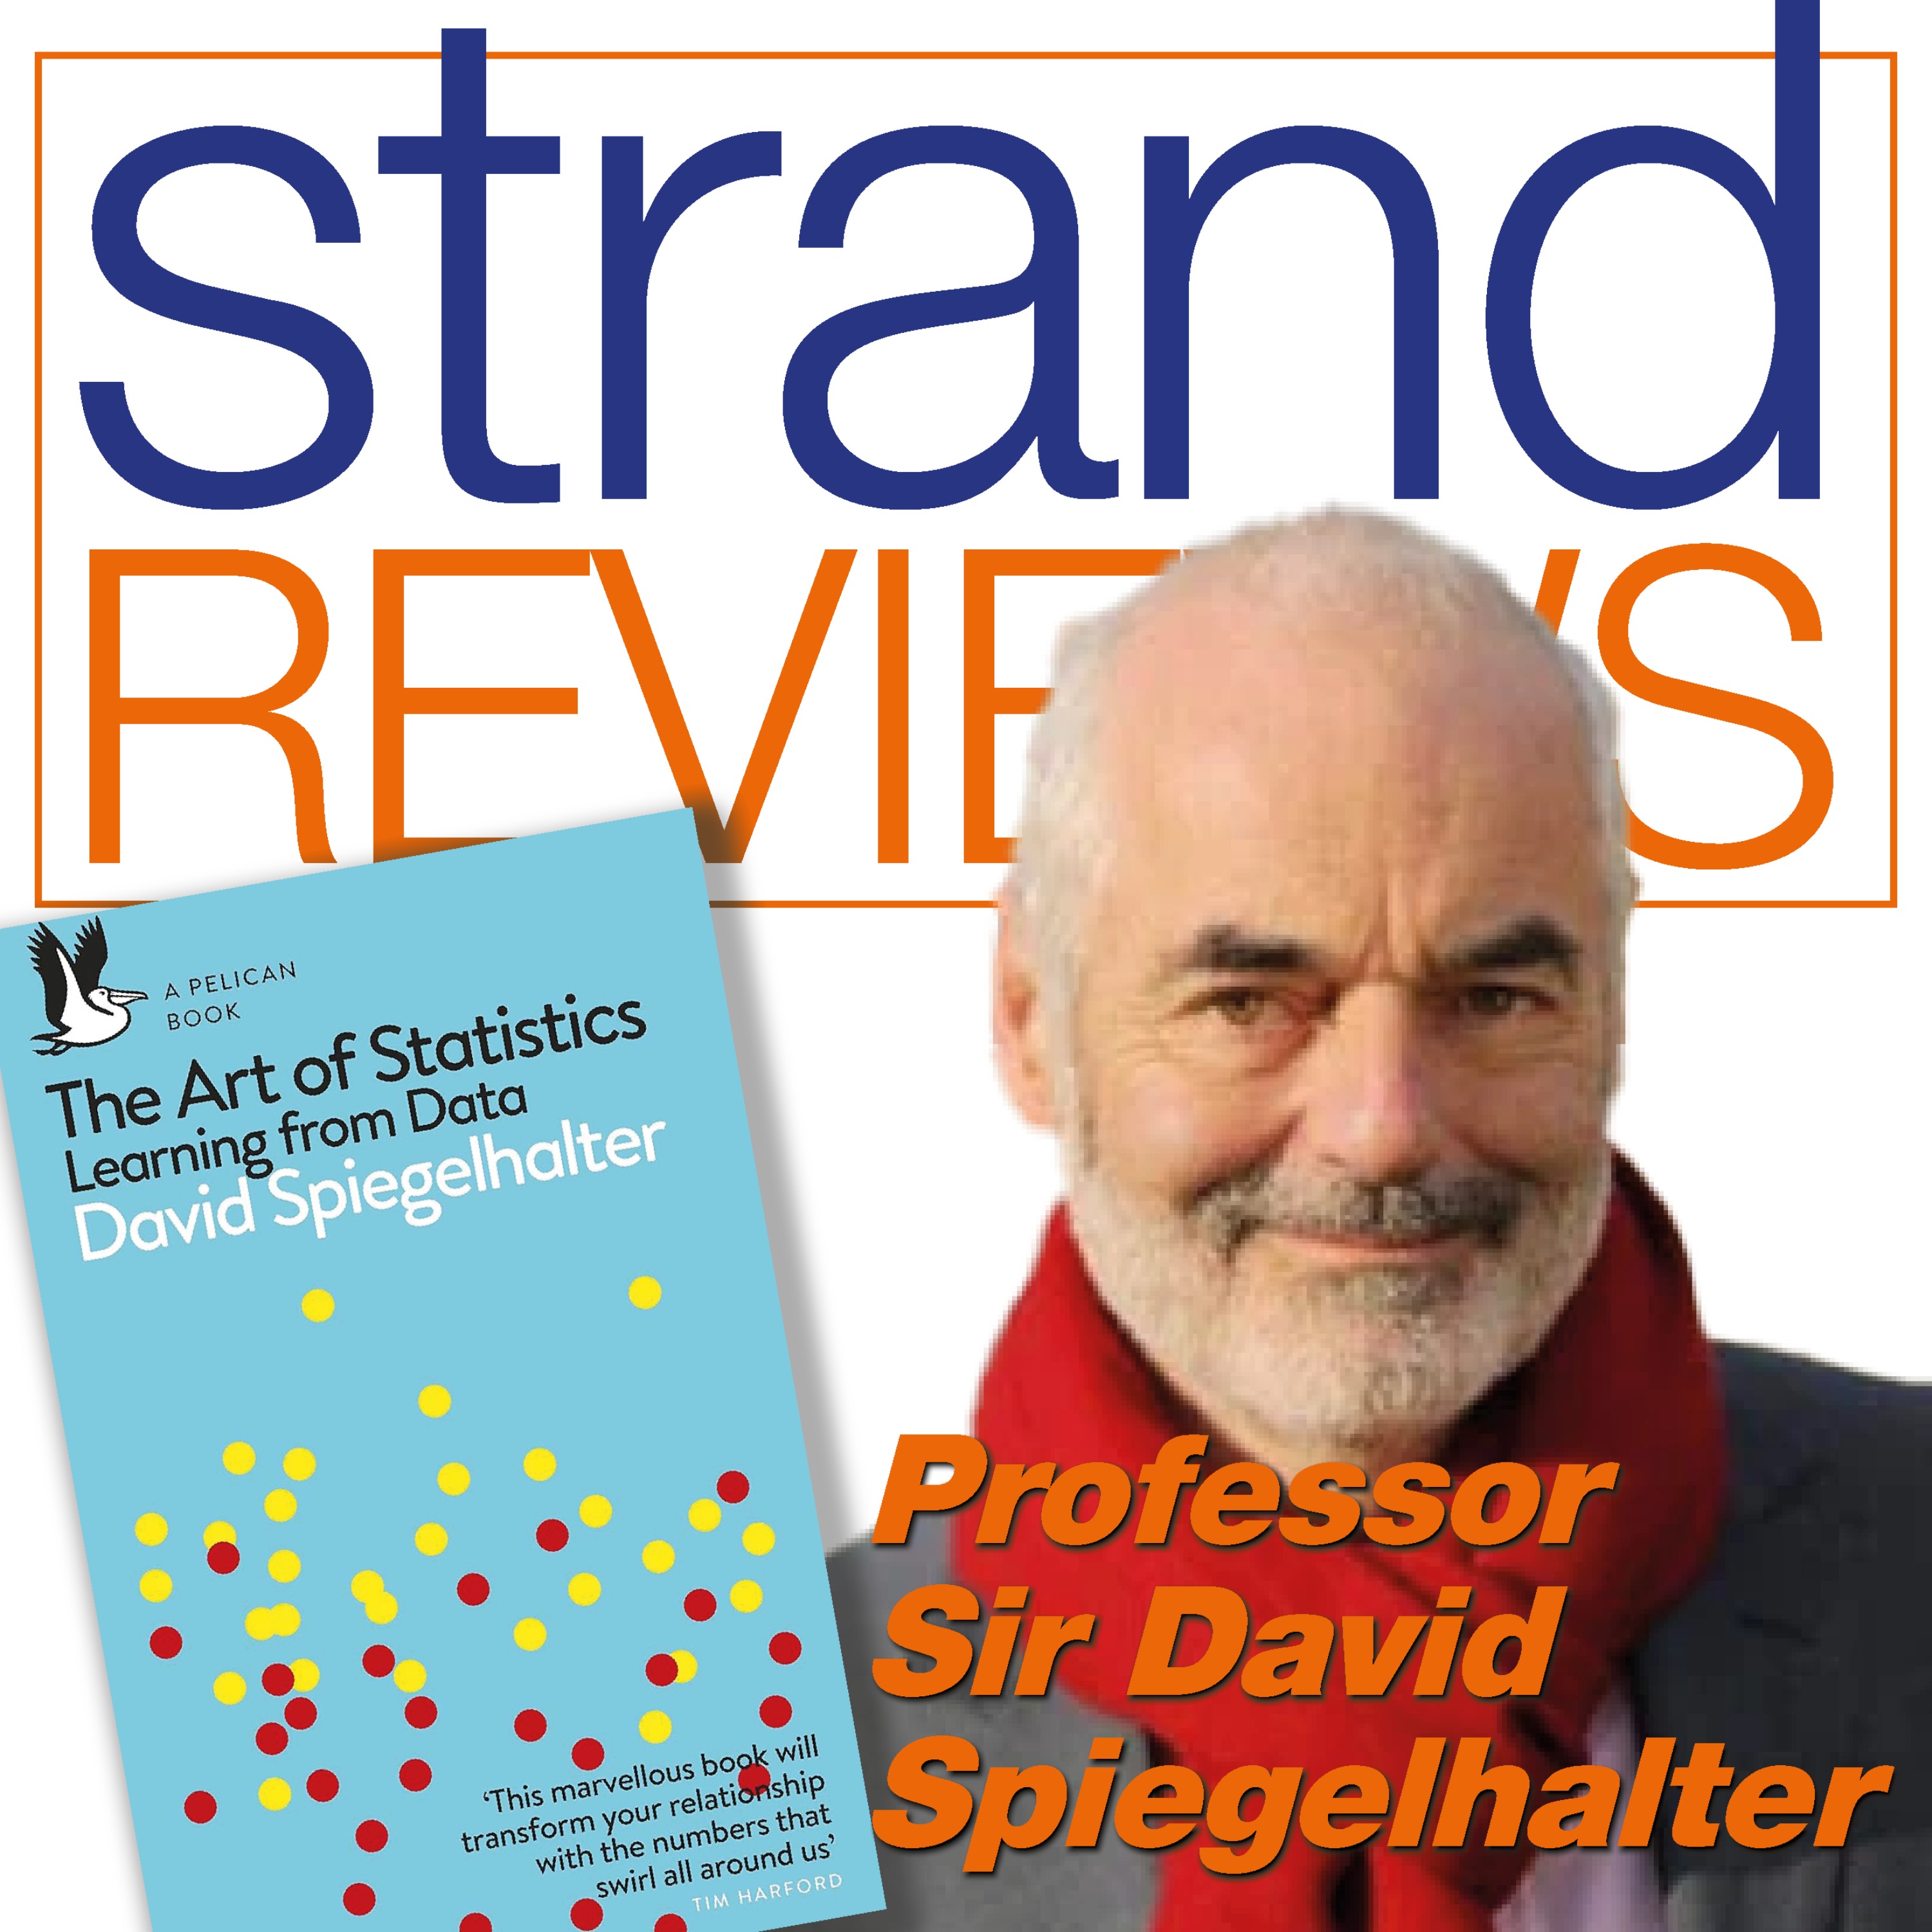 cover art for The Art of Statistics, with the author, Professor Sir David Spiegelhalter